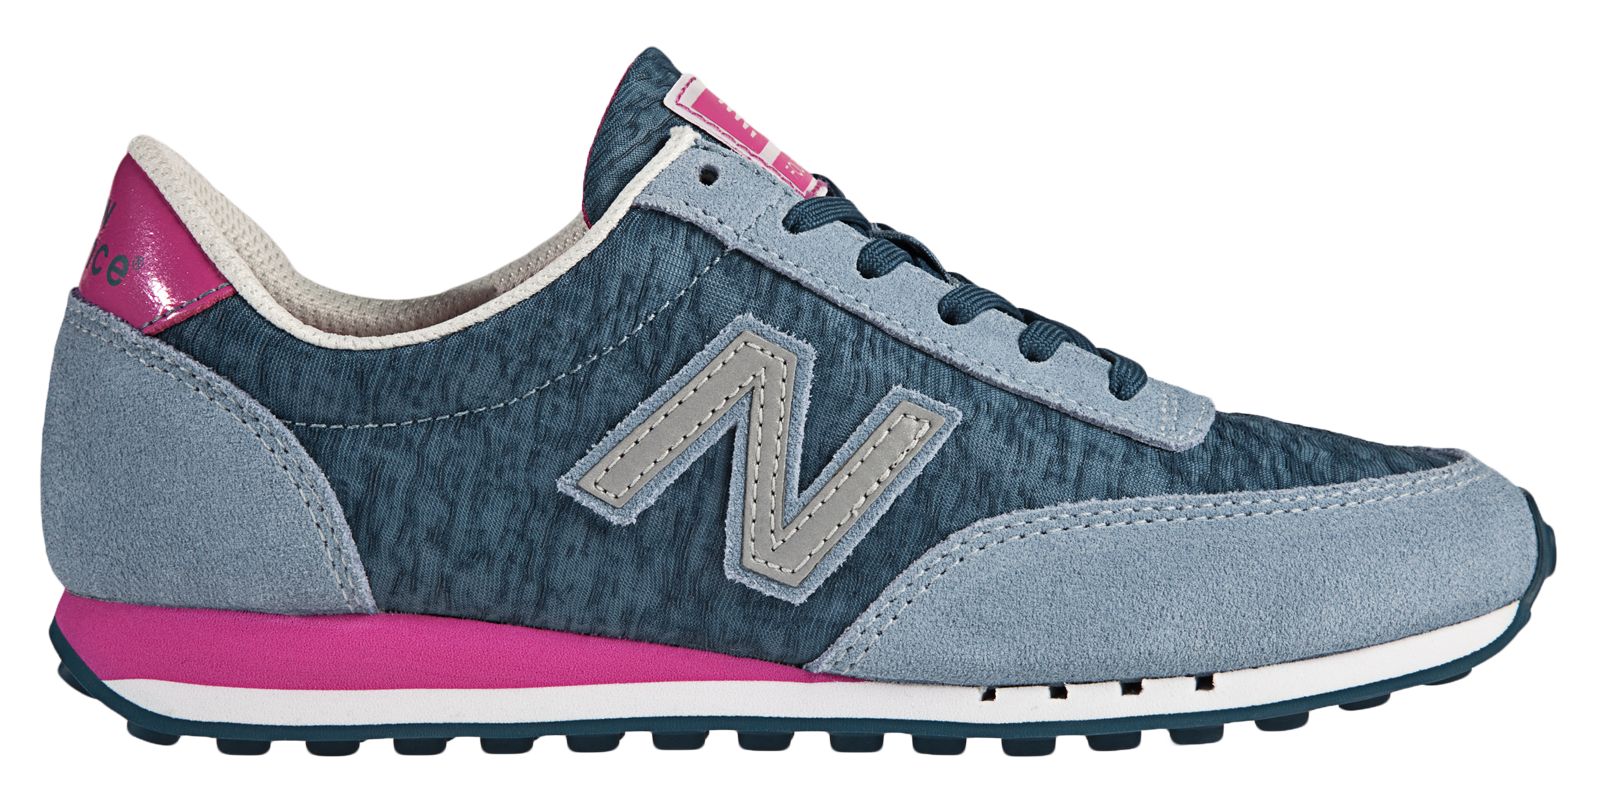 New Balance W410 on Sale - Discounts Up to 38% Off on W410MP at Joe's New  Balance Outlet